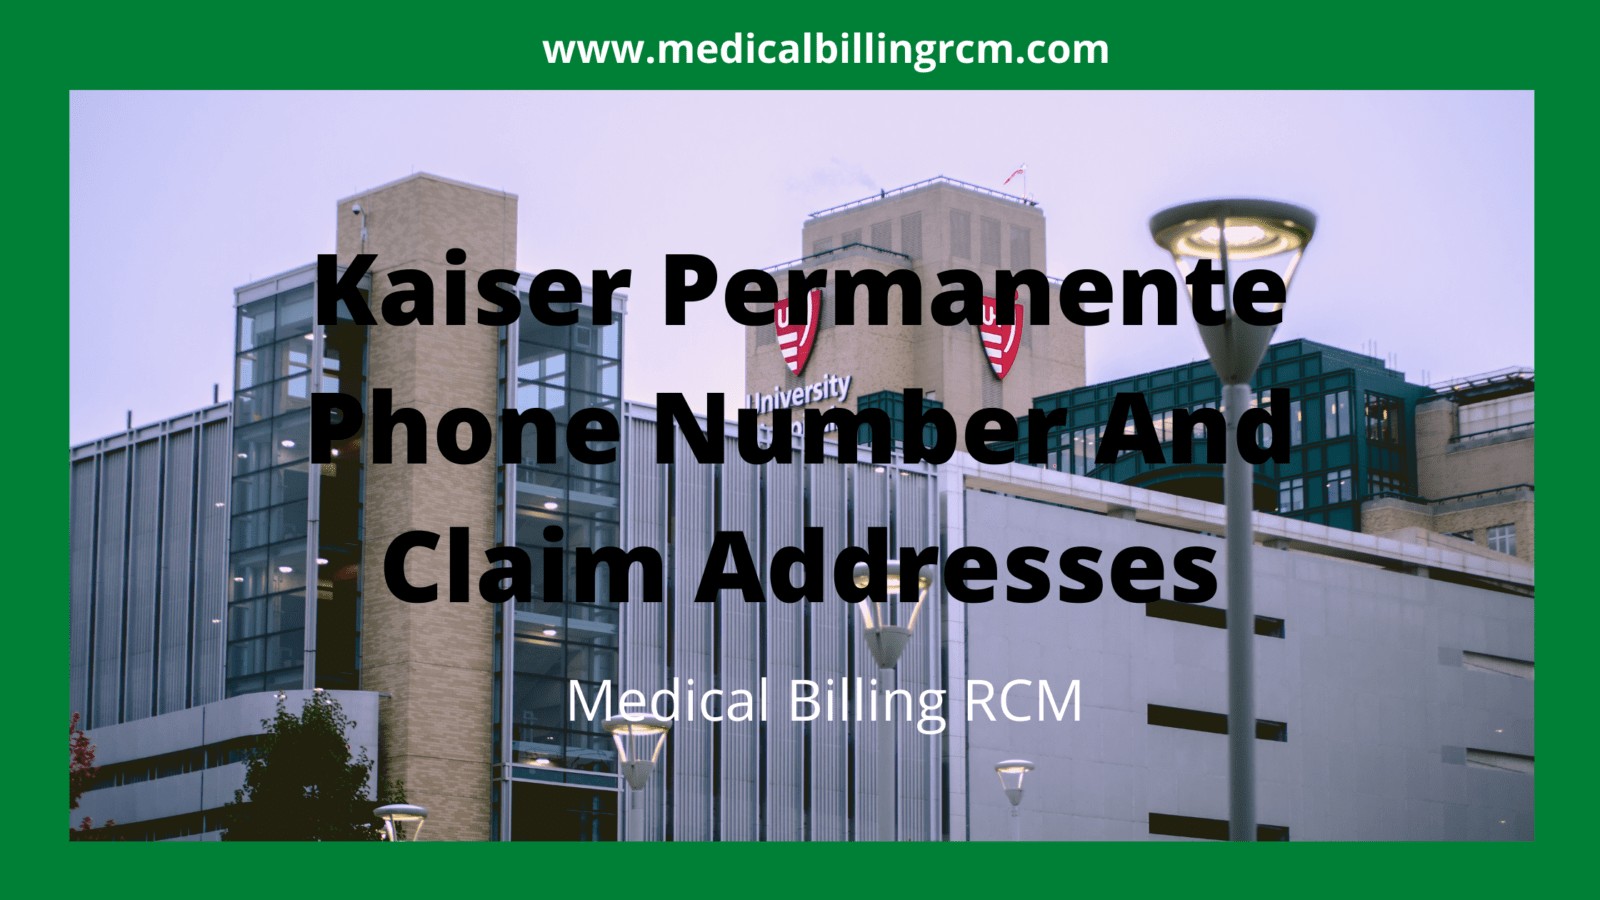 kaiser permanente phone number and claim address